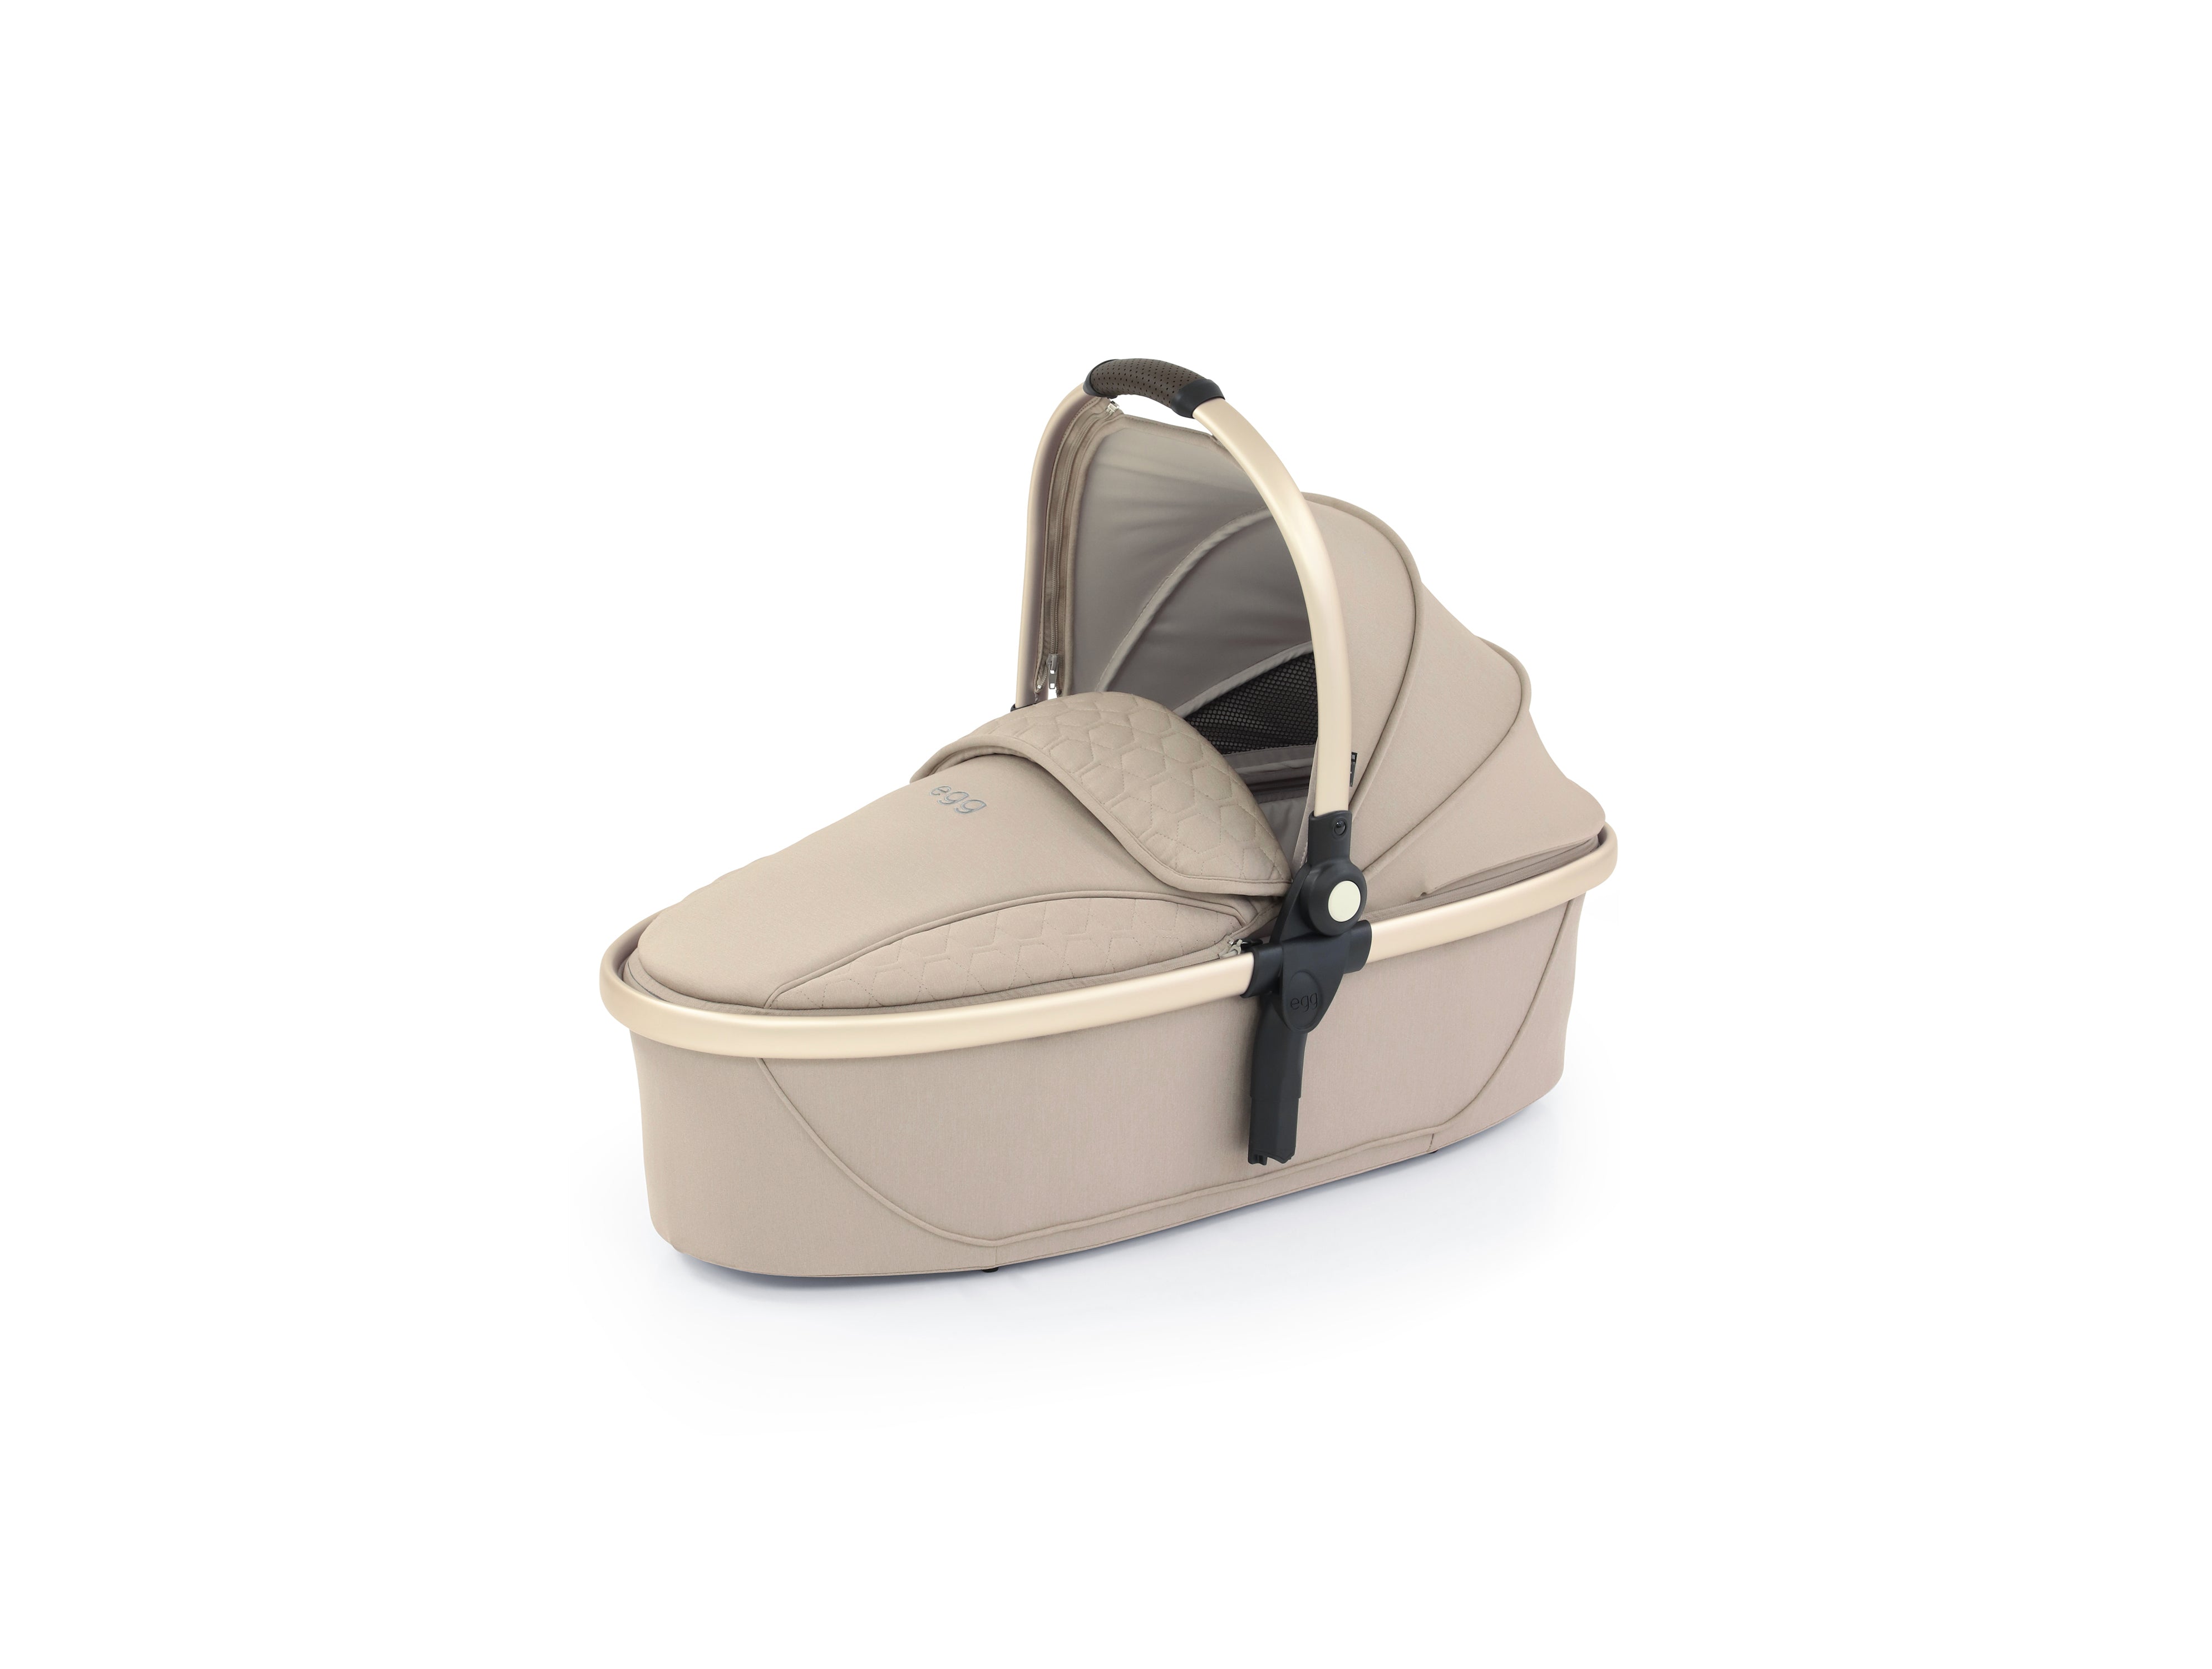 Egg 2 Carrycot - Feather